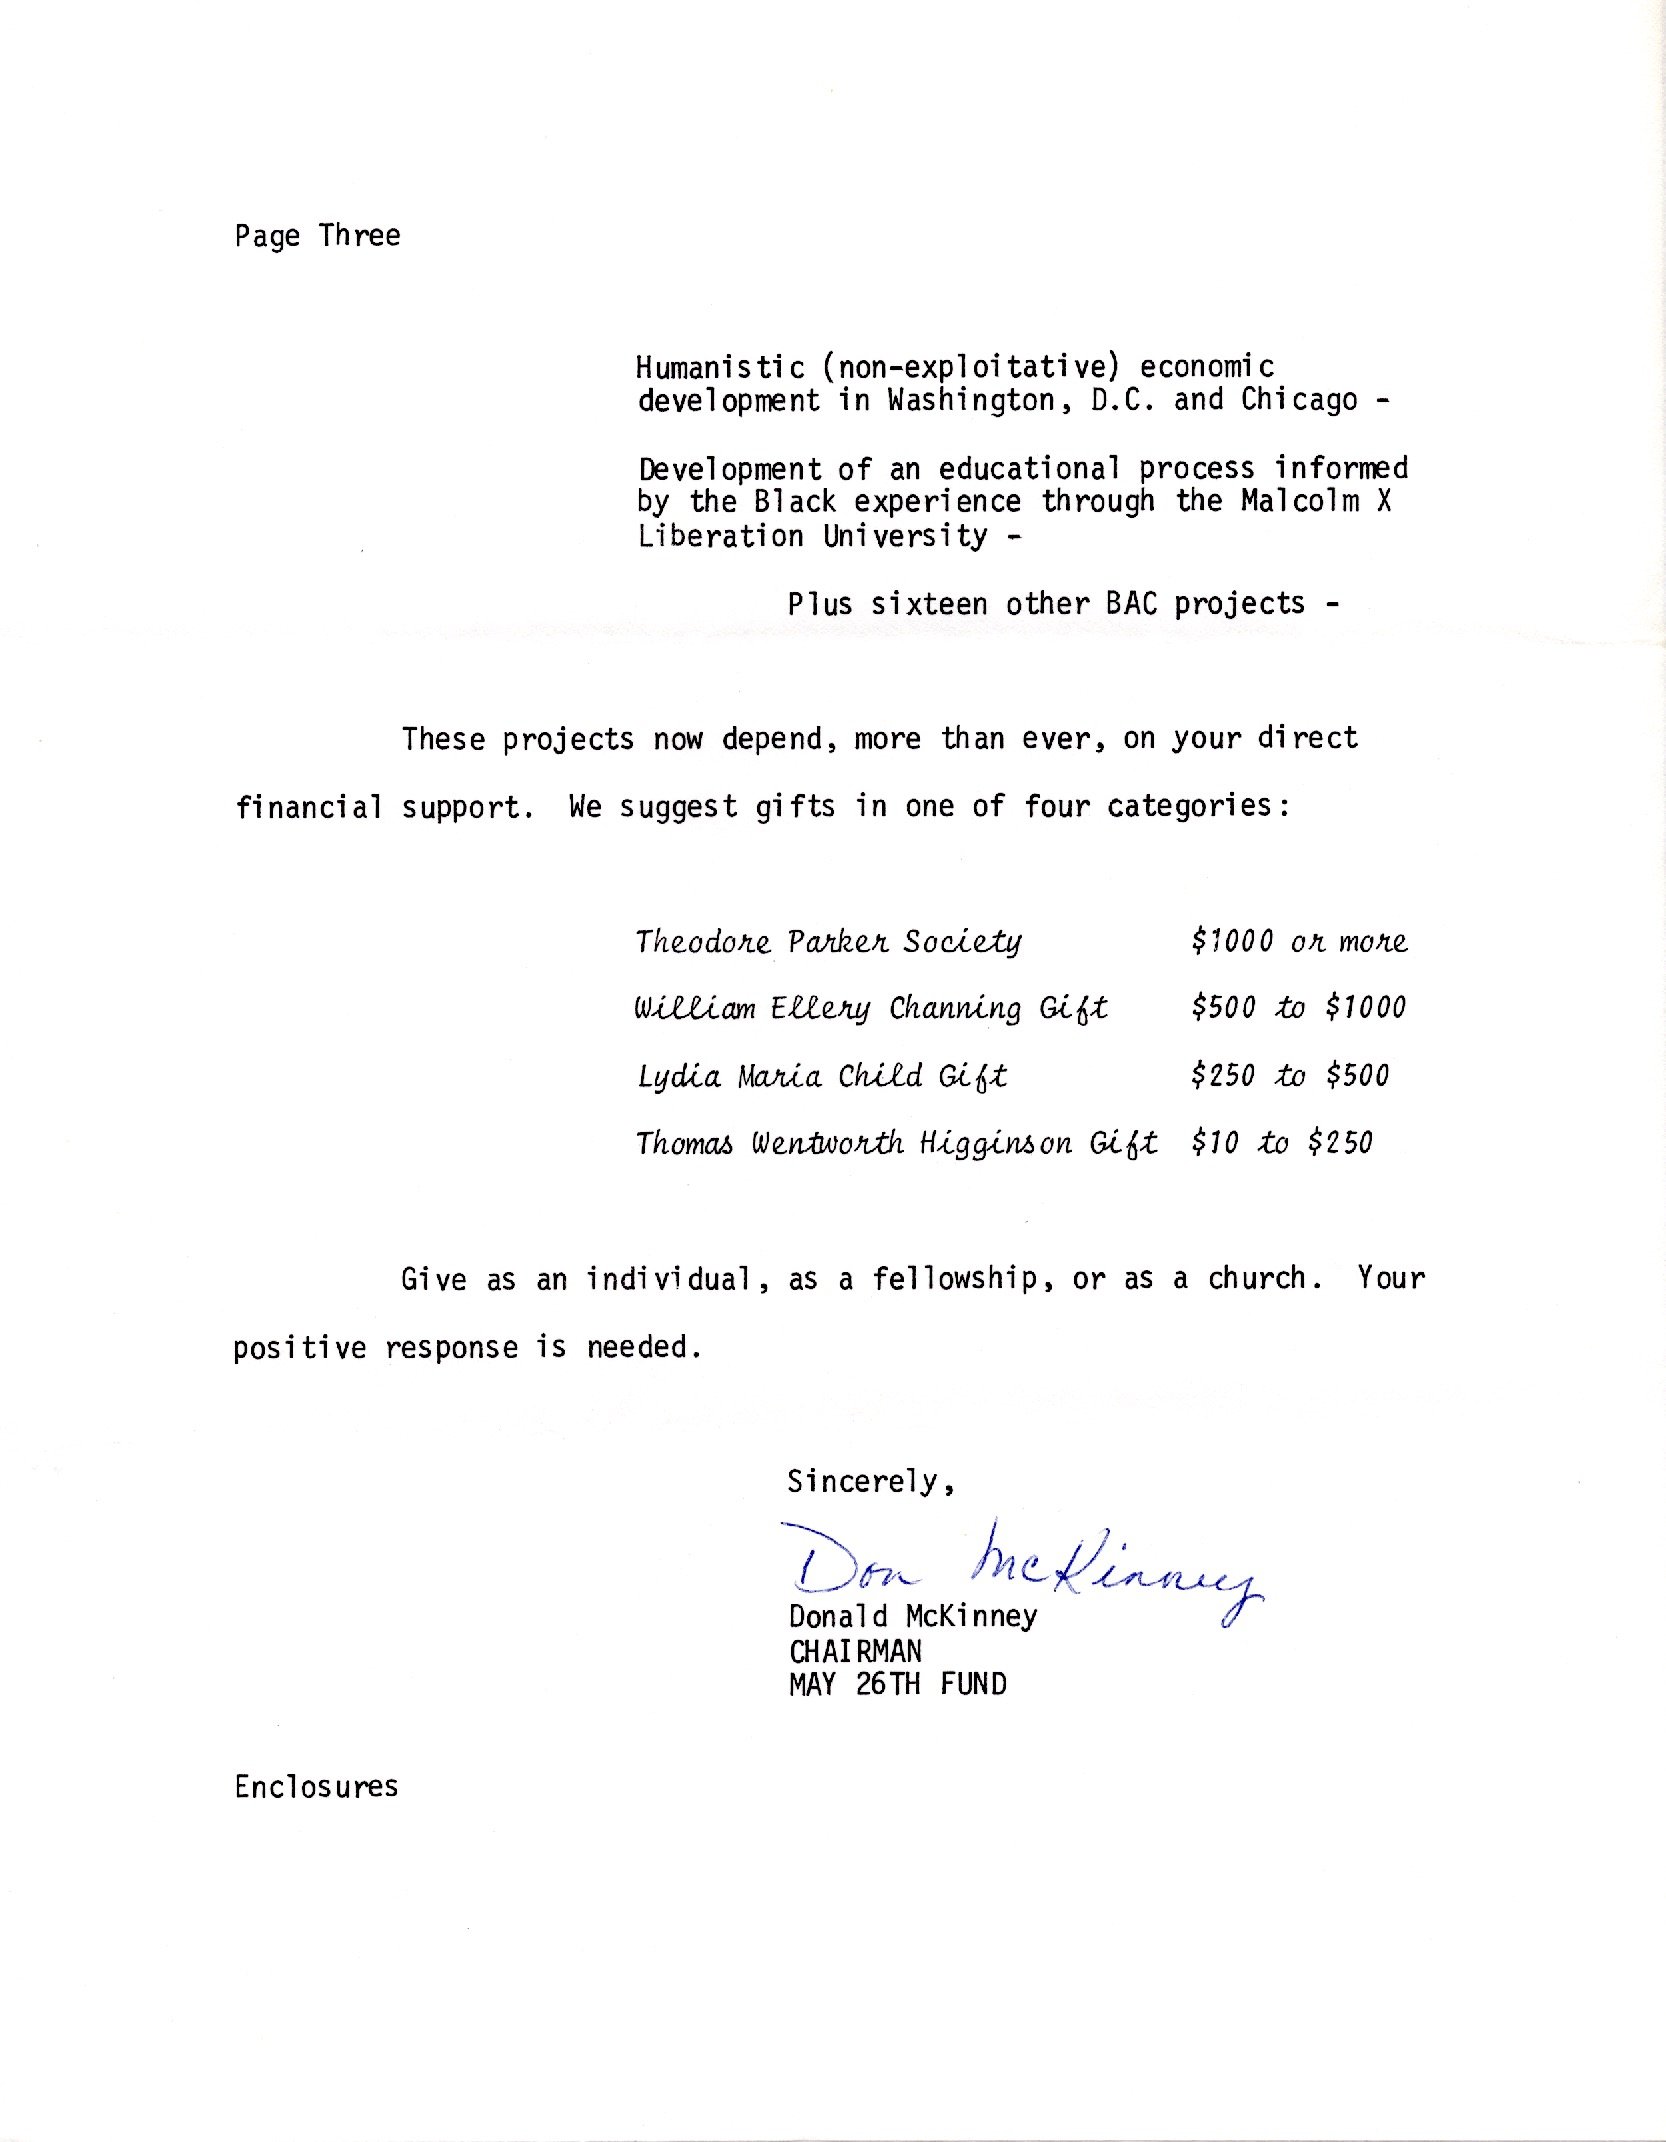 1970.8.19 Letter from Don McKinney to Fritchman re May 26 fund_0003.jpg